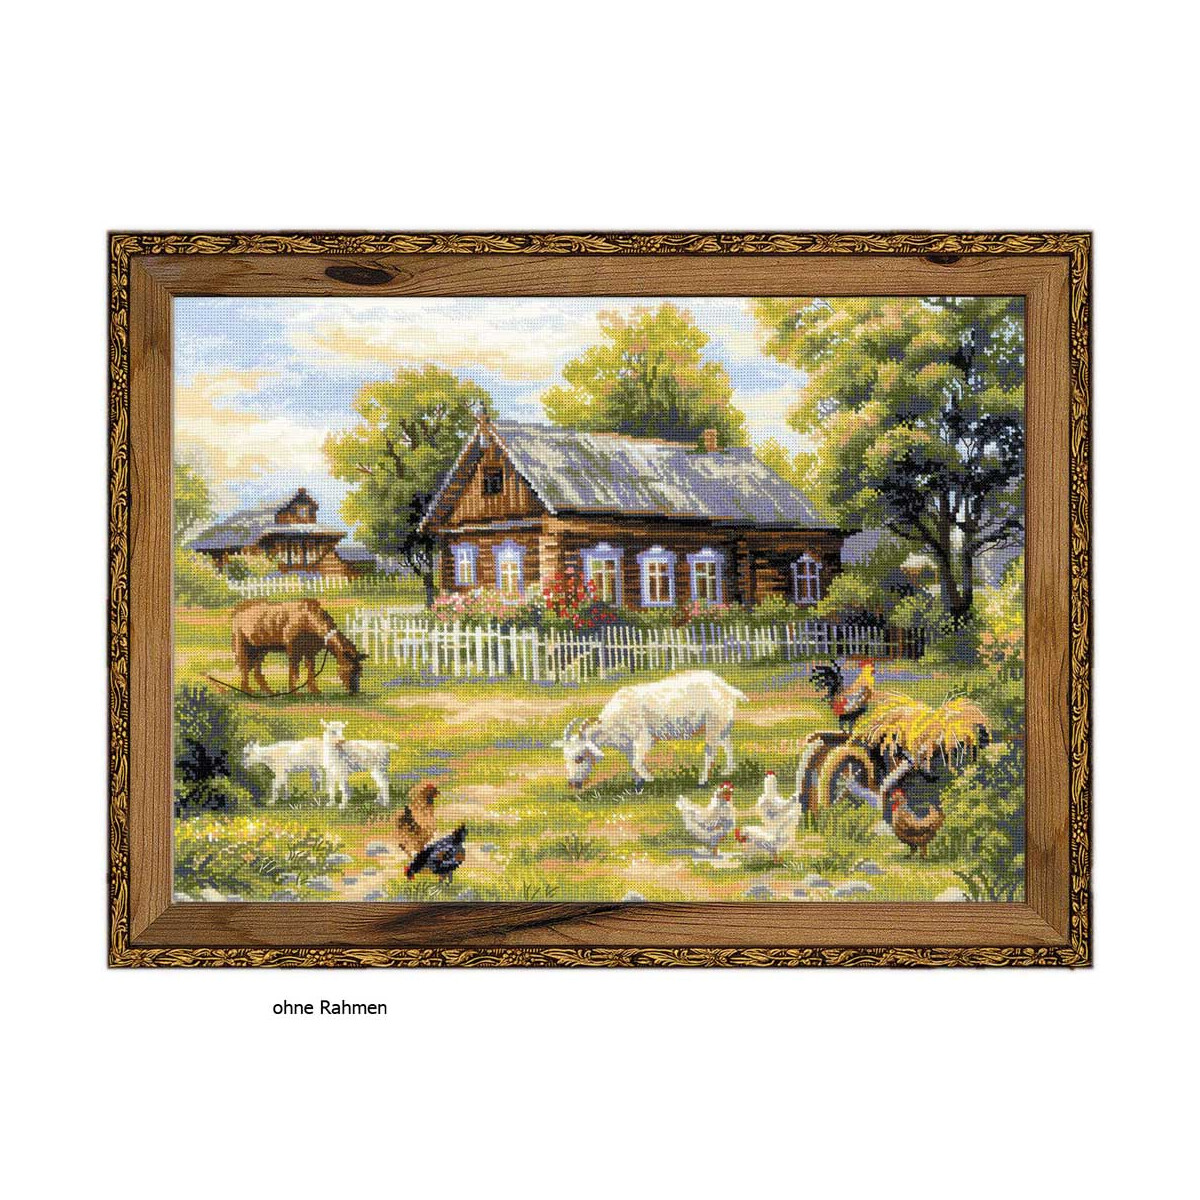 Riolis counted cross stitch Kit Afternoon in the Country,...